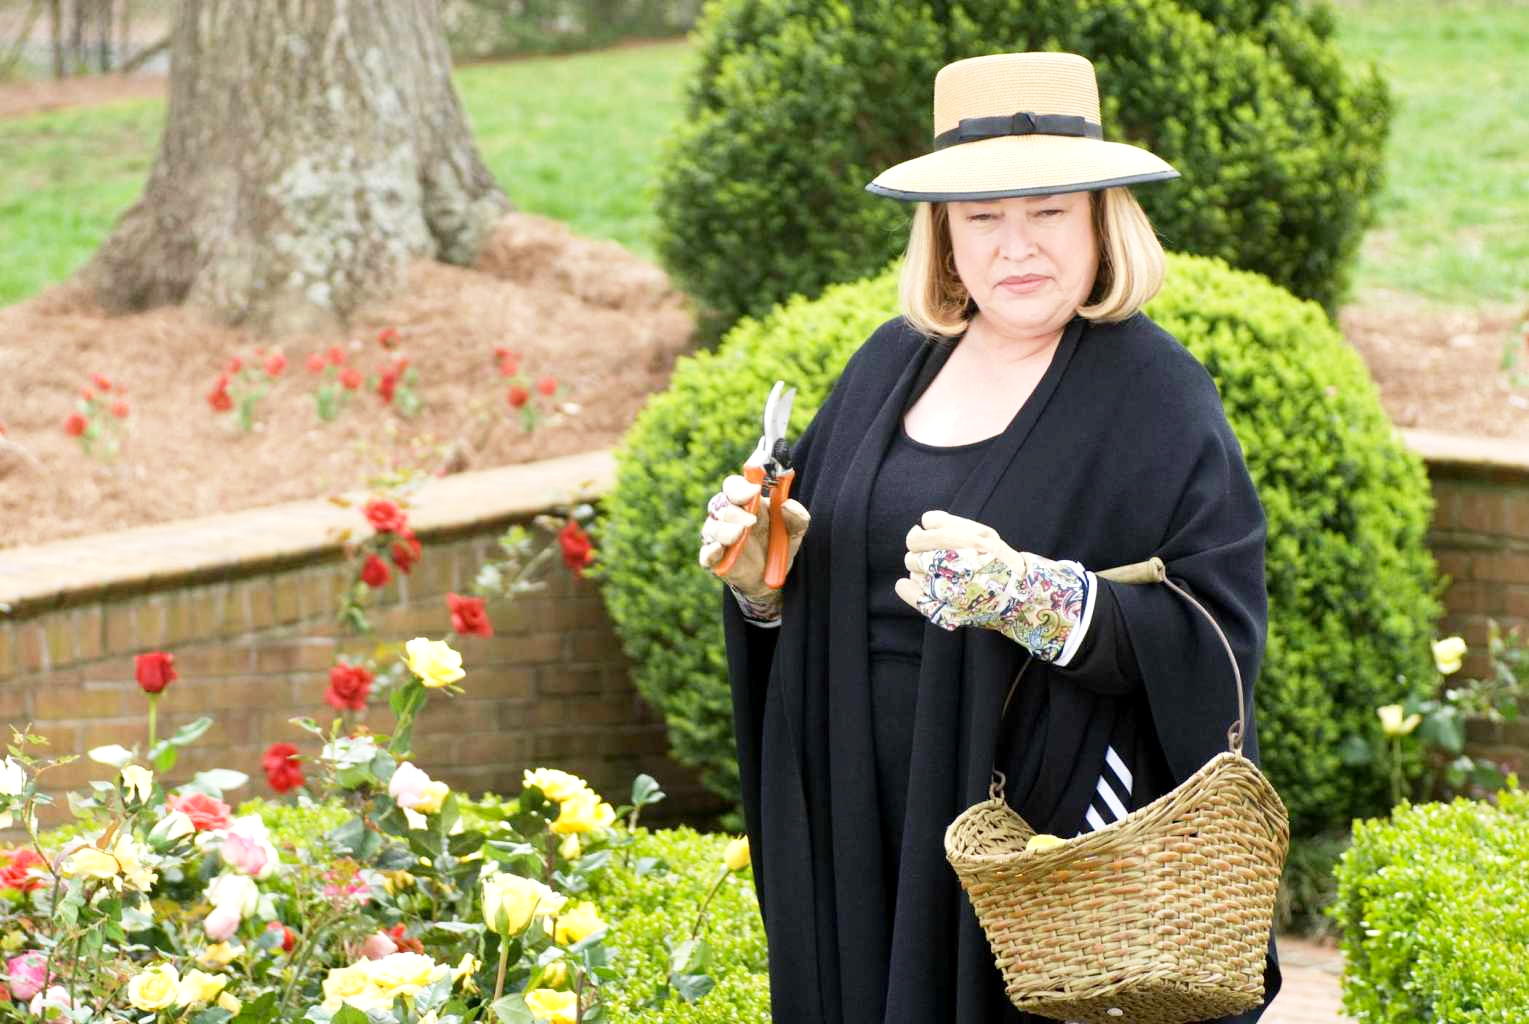 Kathy Bates stars as Charlotte Cartwright in Lionsgate Films' The Family That Preys (2008). Photo credit by Alfeo Dixon.